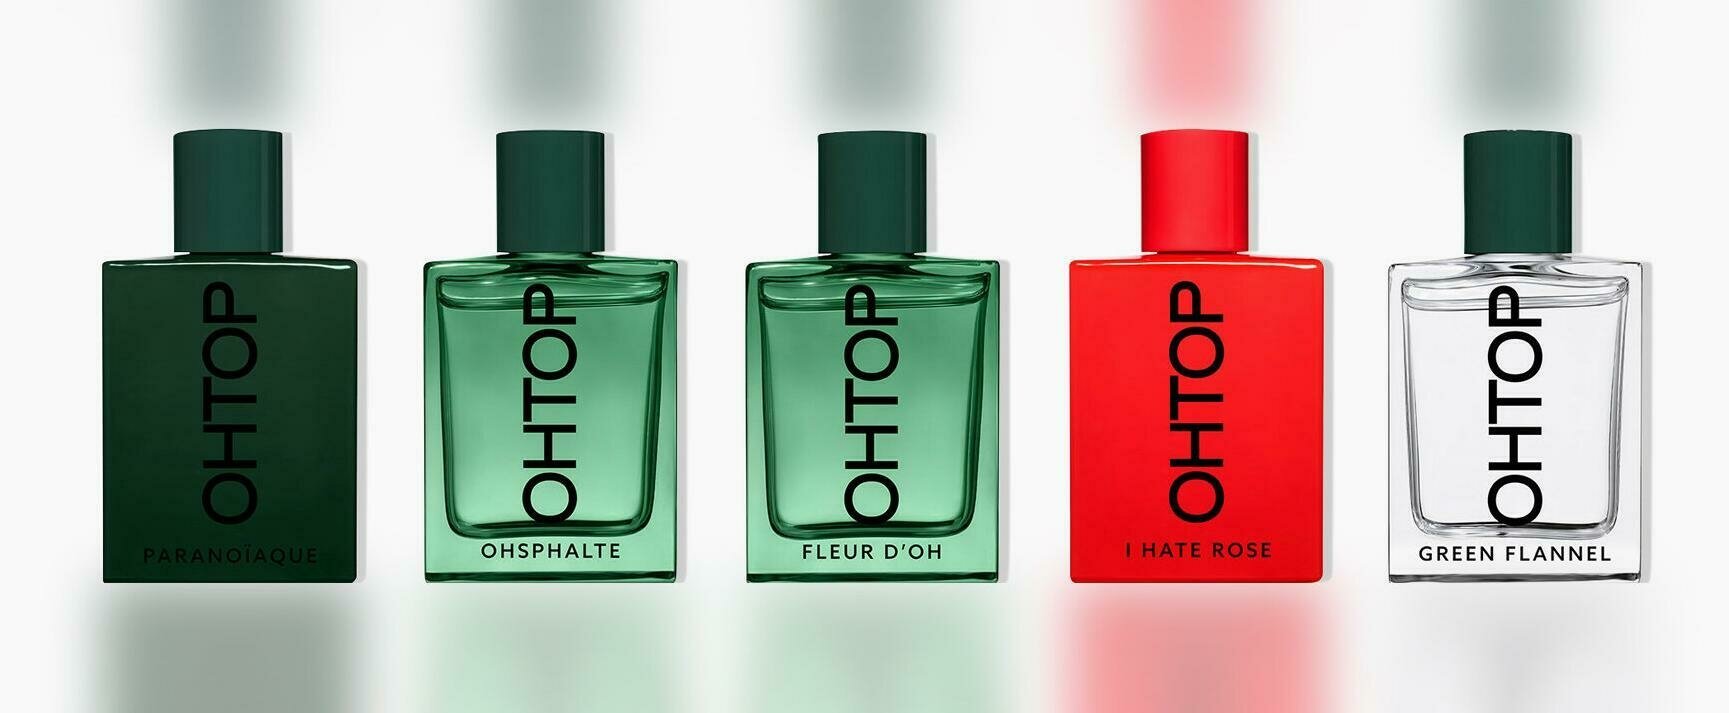 OHTOP Enters the Perfume World With a Collection of Five Unisex Fragrances